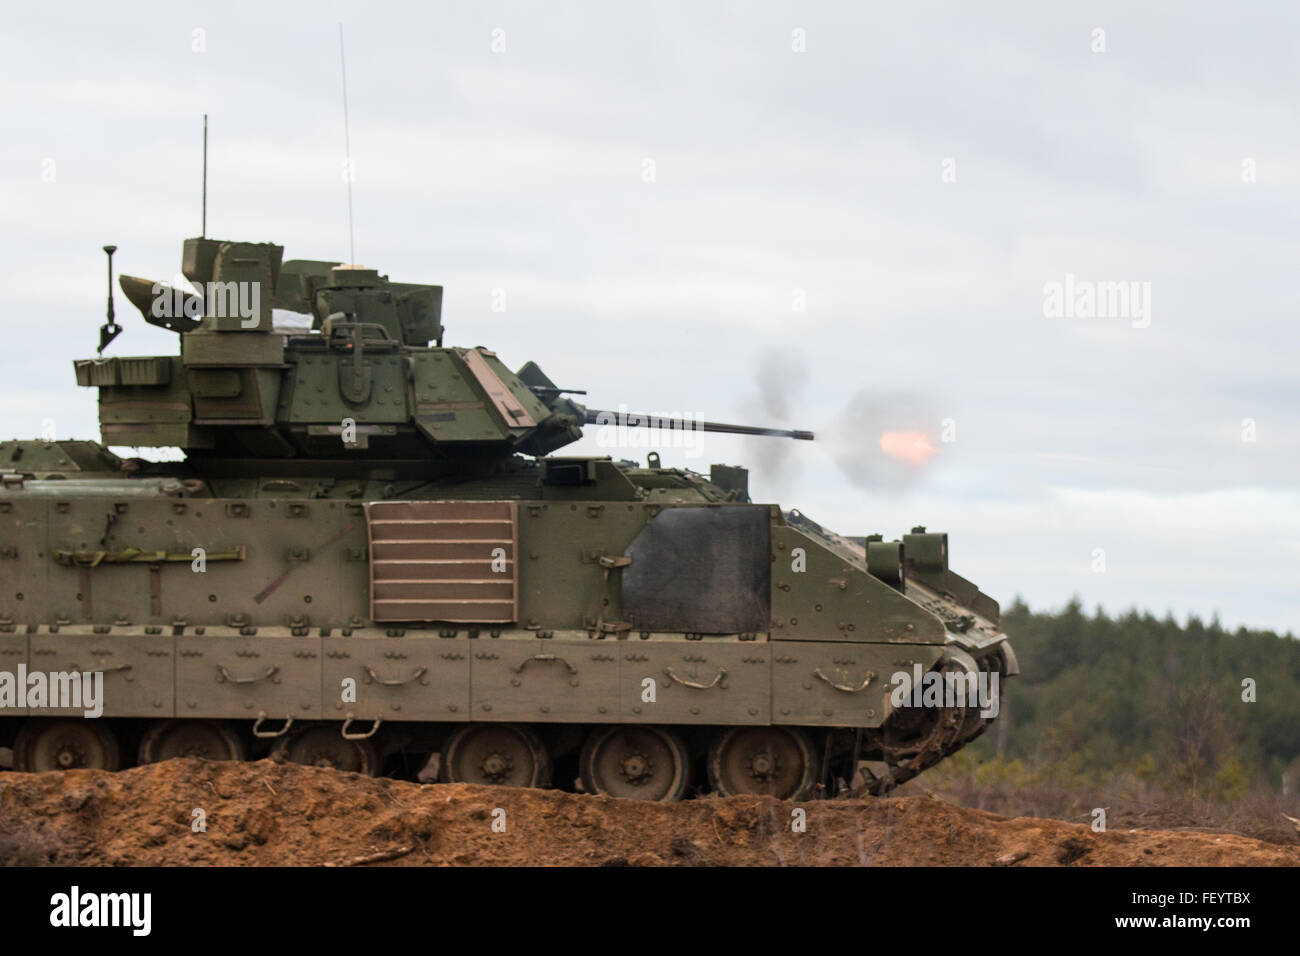 A Bradley Fighting Vehicle belonging to the 3rd Battalion, 69th Armor Regiment, 1st Armor Brigade Combat Team, 3rd Infantry Division, engages targets during gunnery training at Pabrade Training Area, Lithuania on Dec. 2, 2015.  Battle drills and gunnery training have been a priority for Soldiers of the 3rd Bn., 69th Armor Regt. in Lithuania. Stock Photo